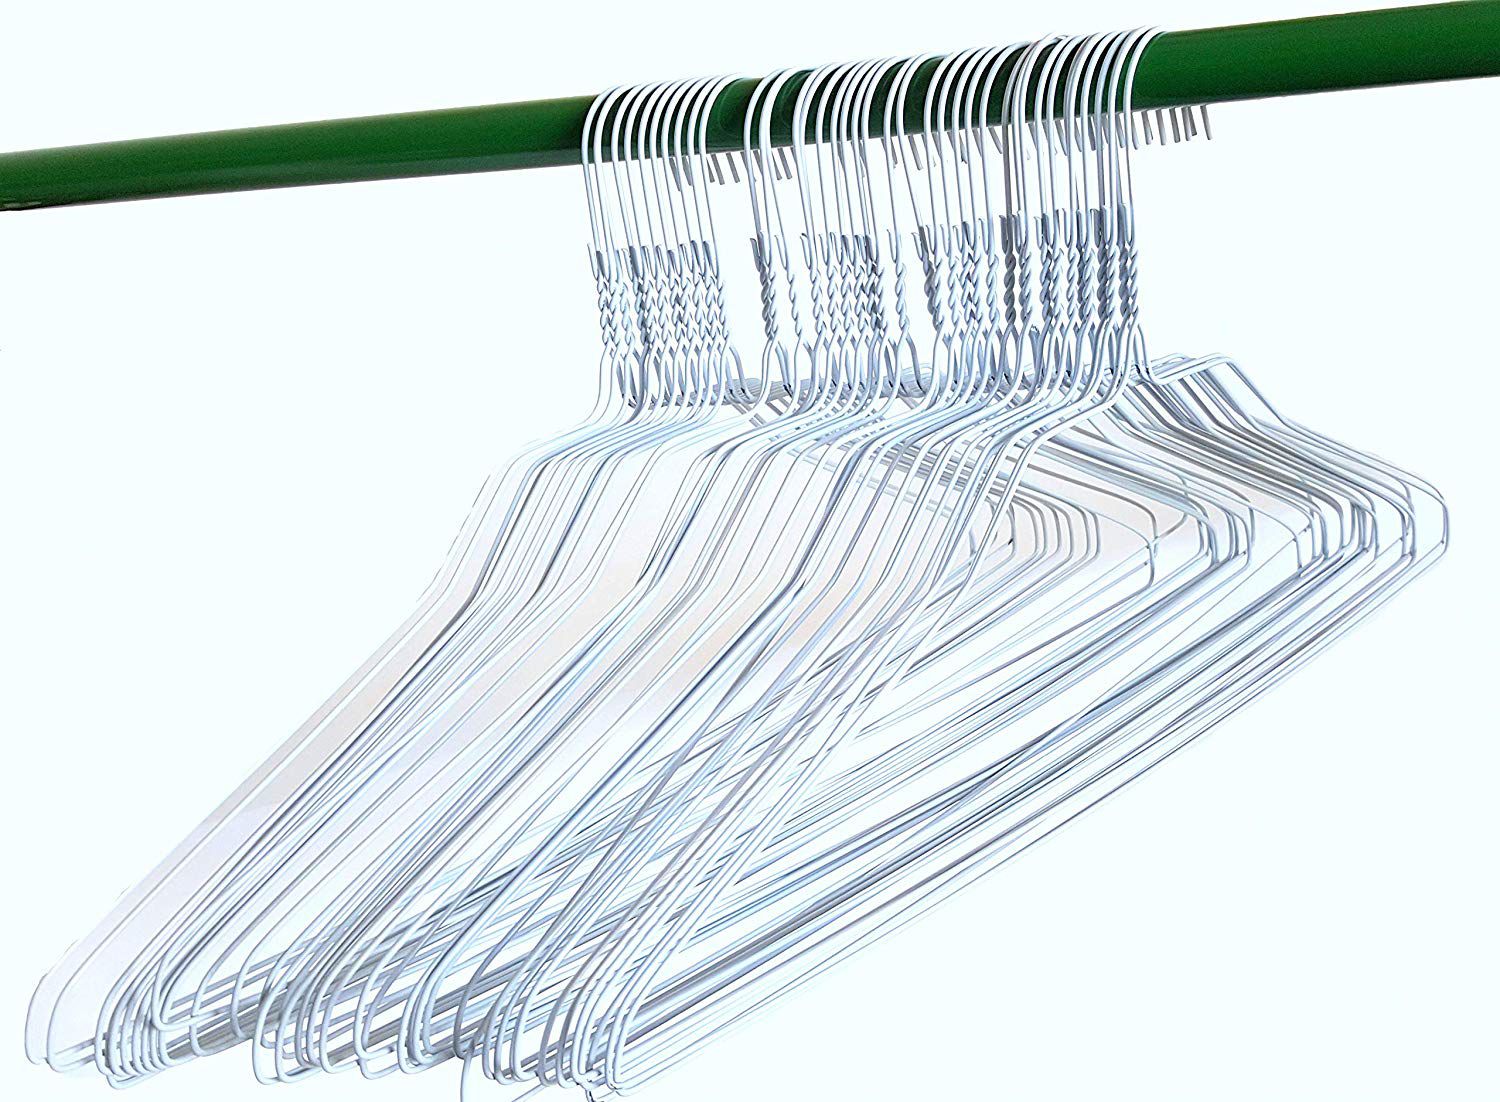 Dry Cleaners White Wire Hangers 18 Inch 14g (500 Box)